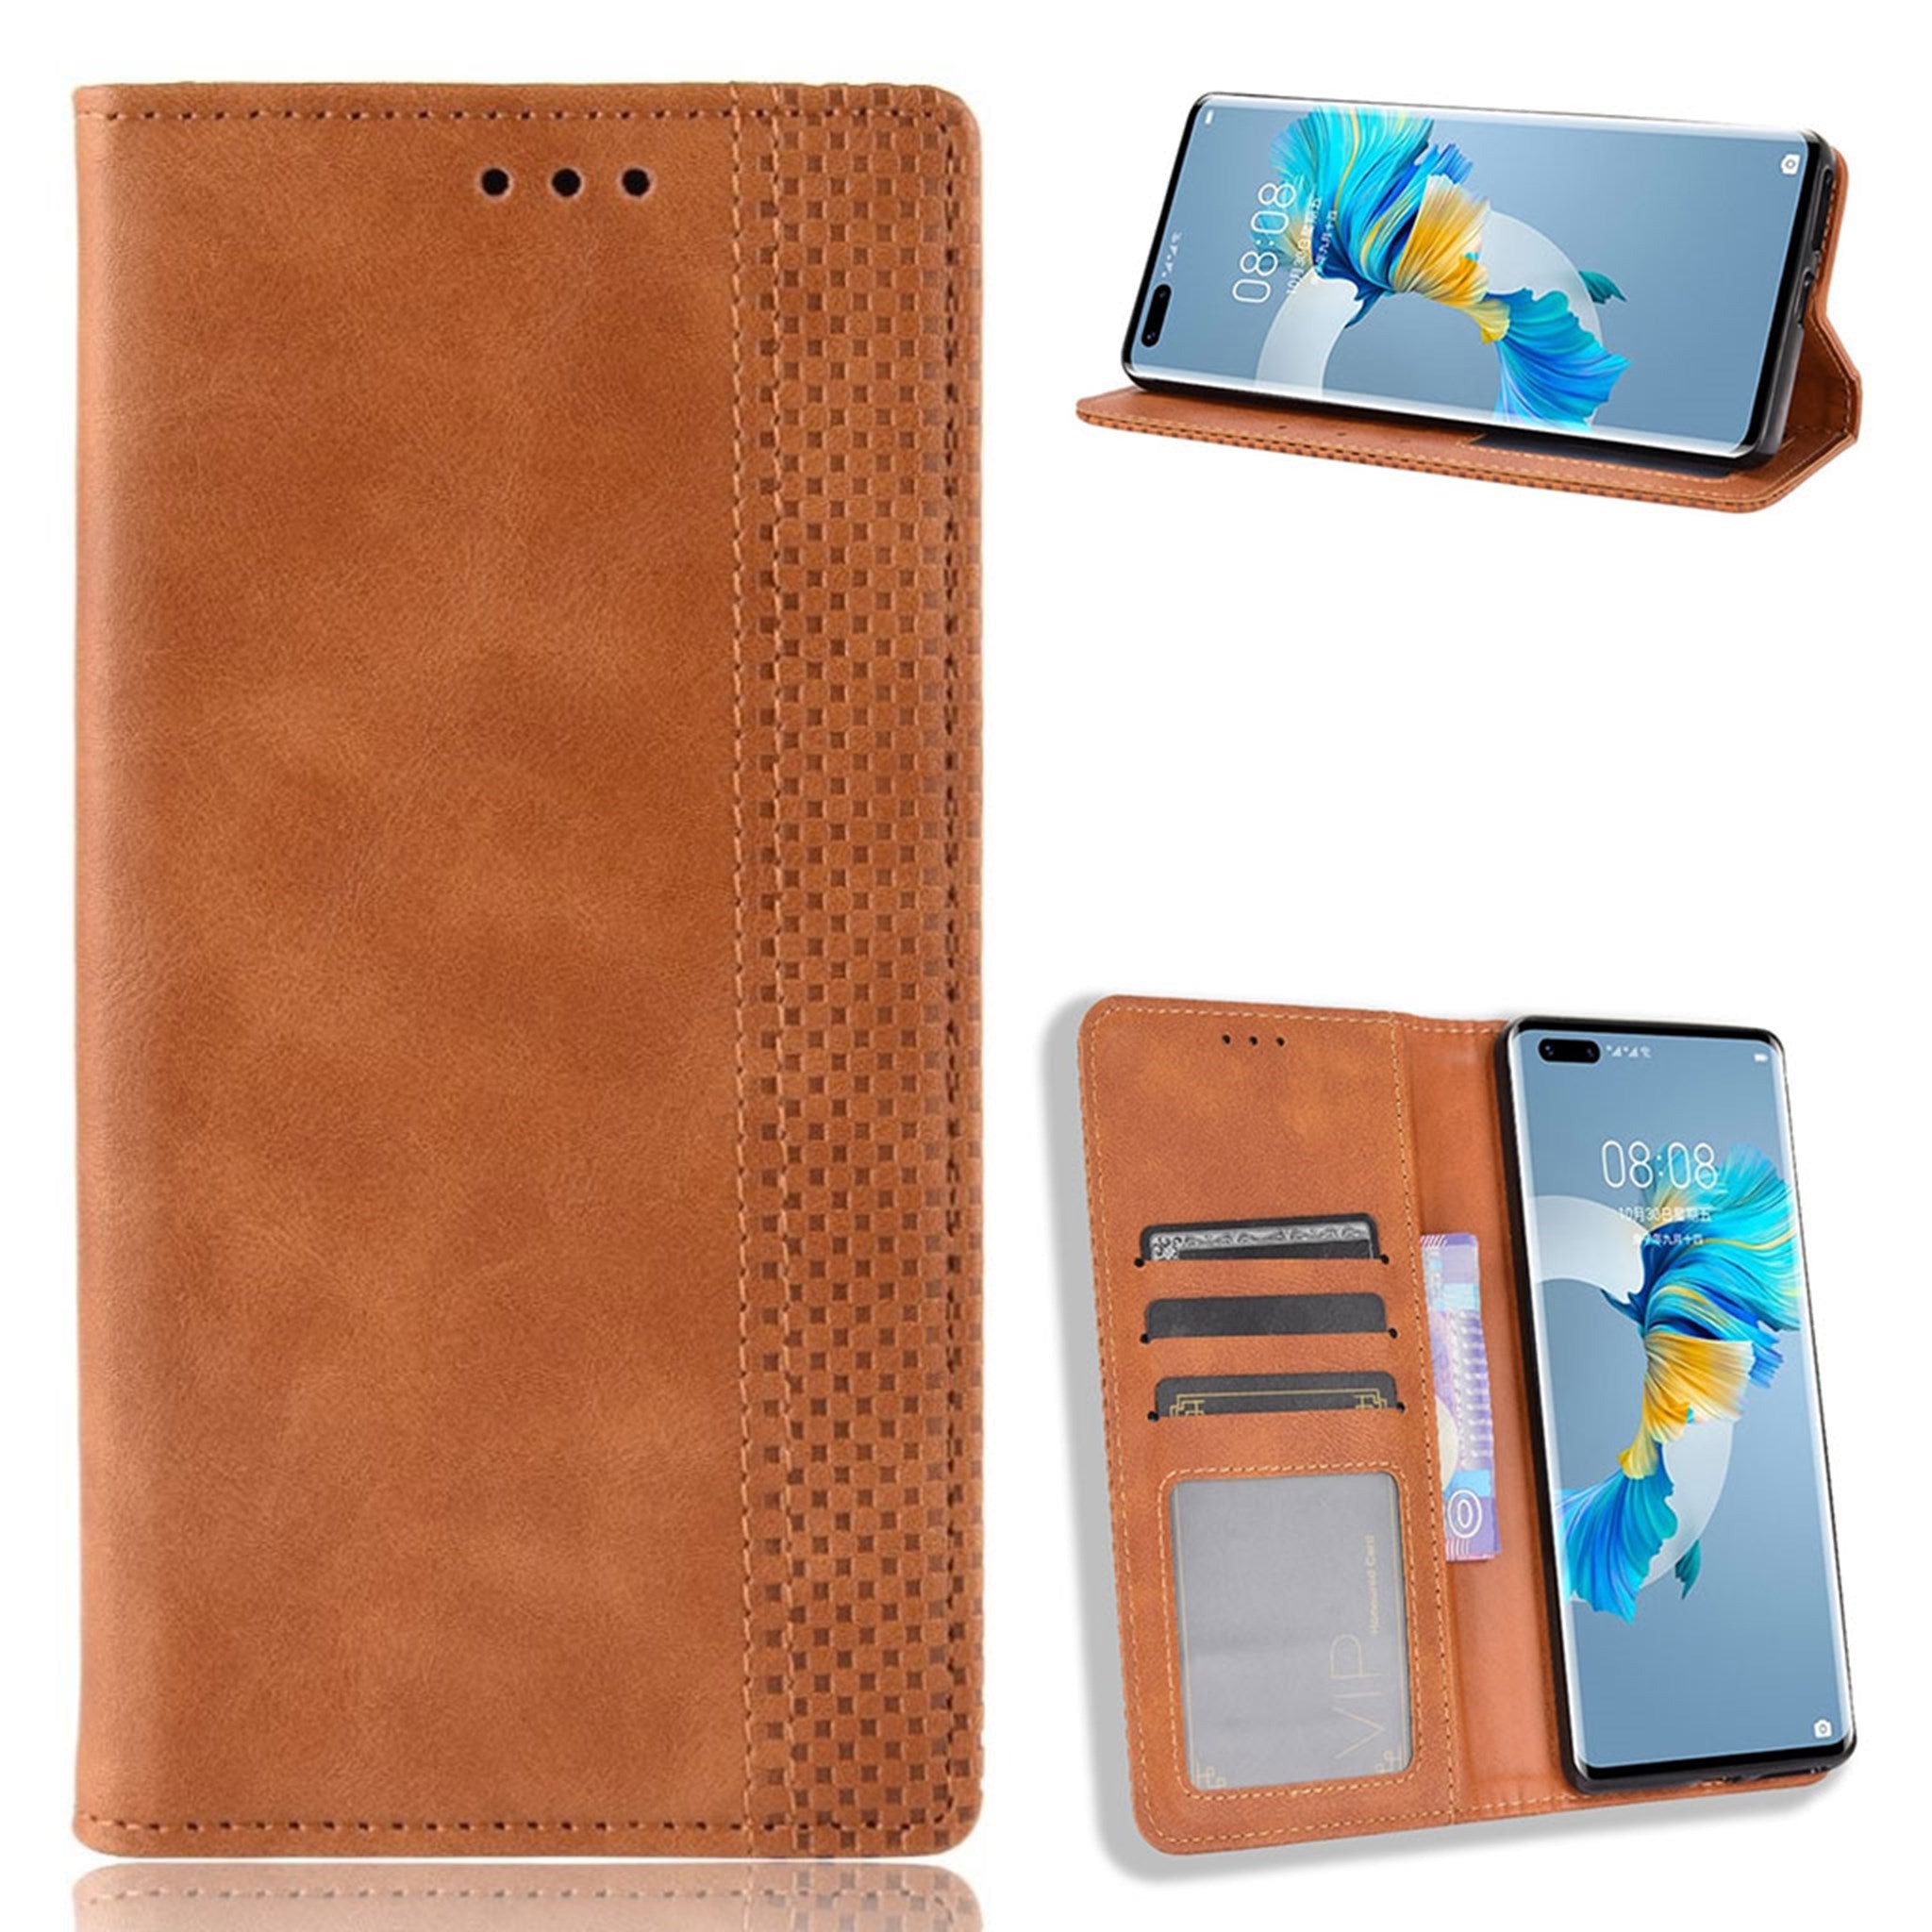 Bofink Vintage Huawei Mate 40 Pro leather case - Brown